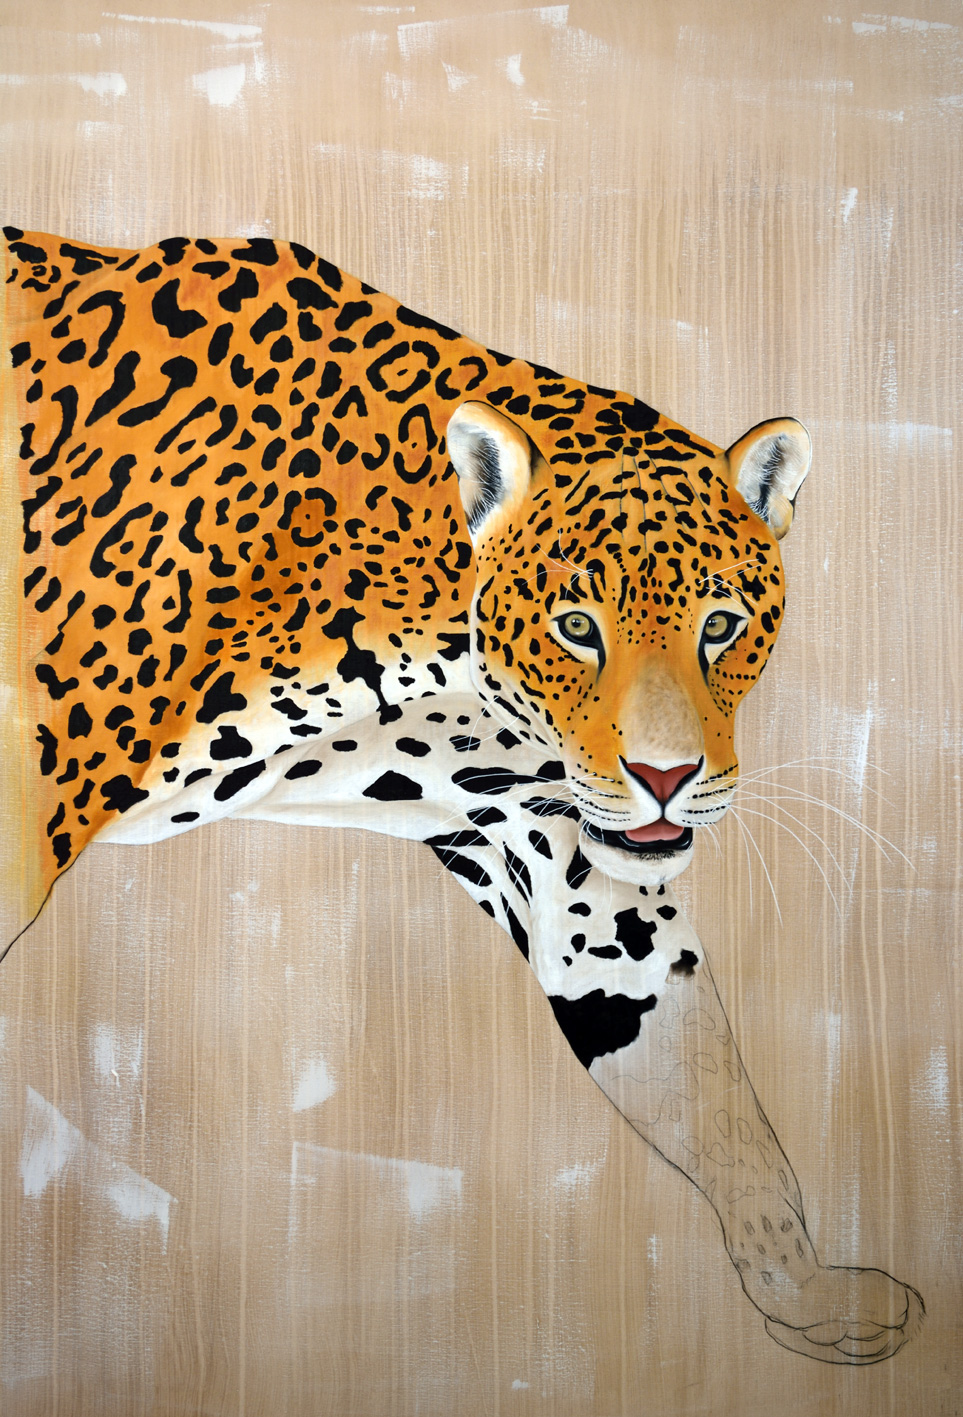 PANTHERA-ONCA jaguar-panthera-onca-delete-threatened-endangered-extinction Thierry Bisch Contemporary painter animals painting art  nature biodiversity conservation 